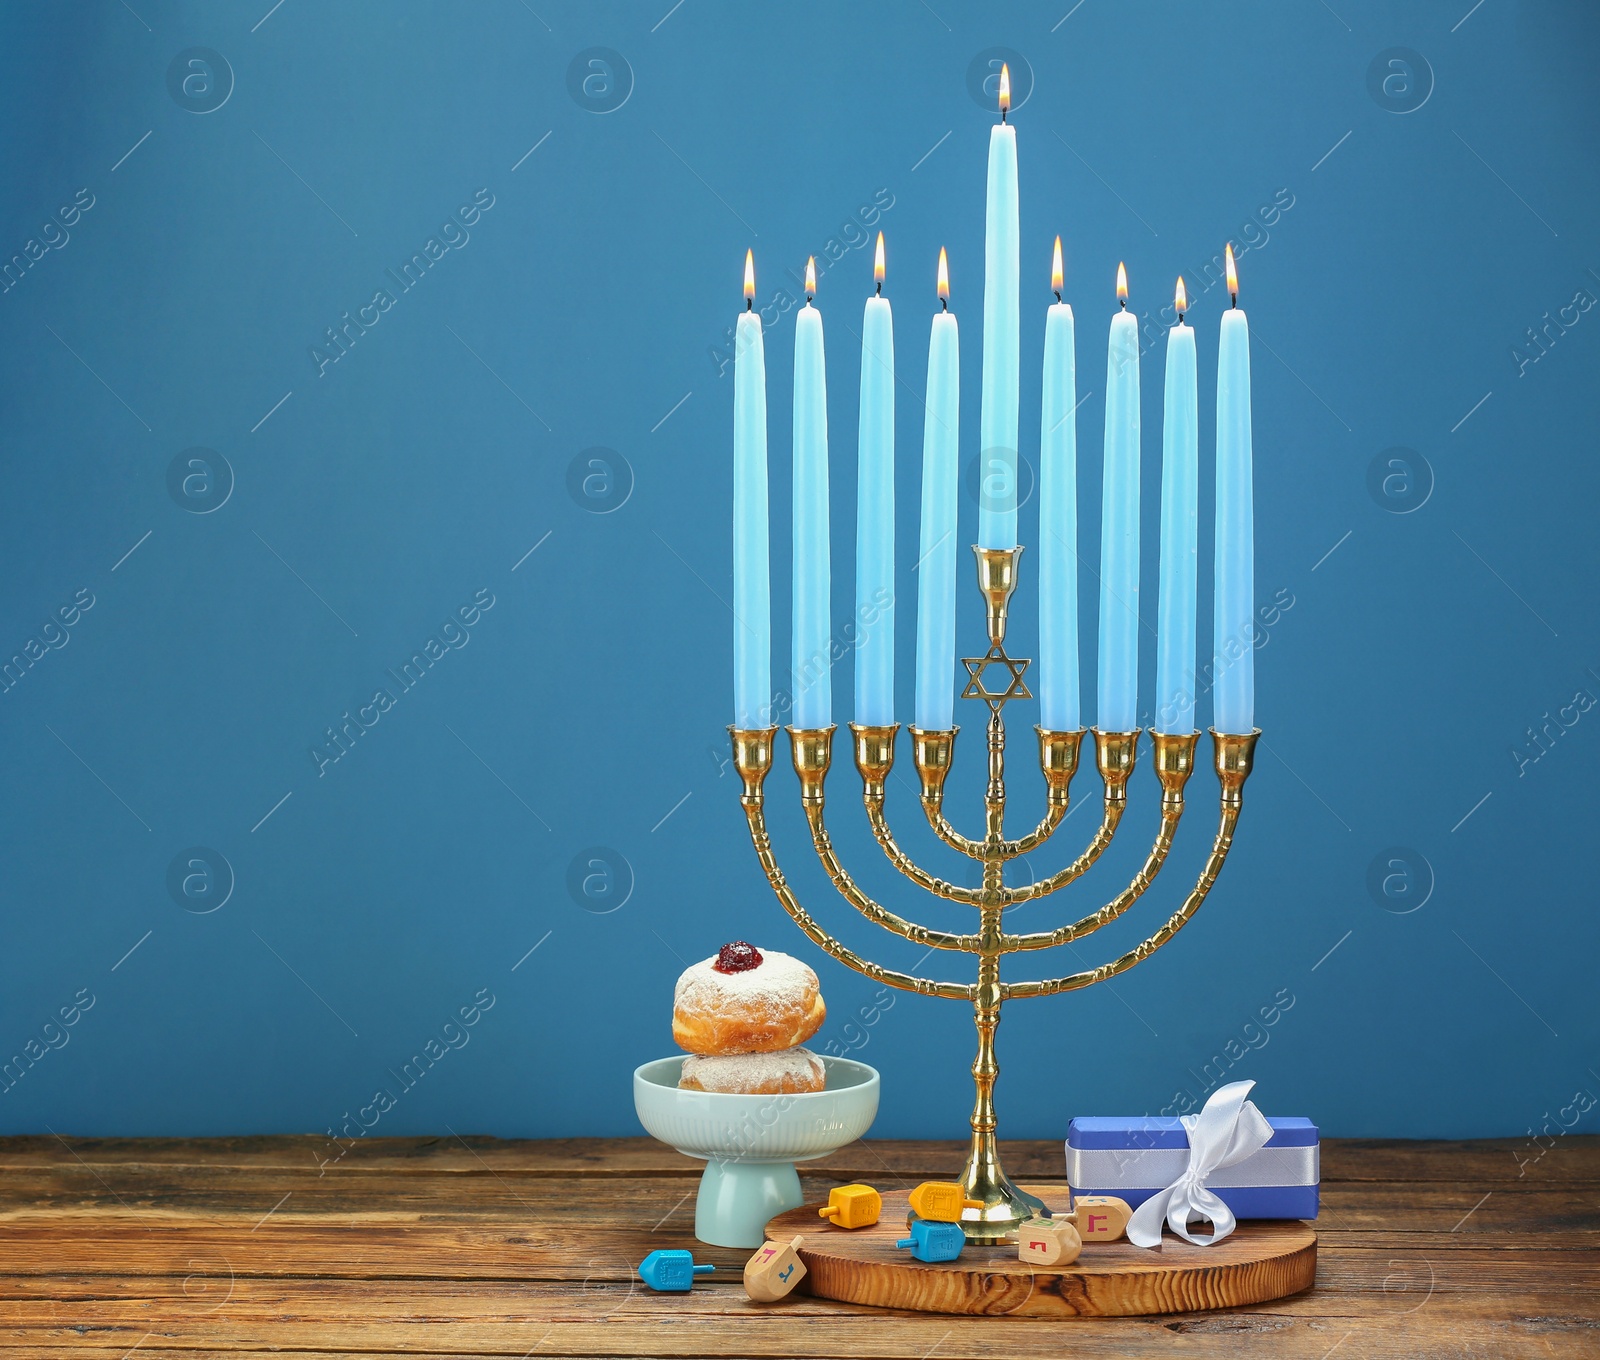 Photo of Hanukkah celebration. Menorah with burning candles, dreidels, donuts and gift box on wooden table against blue background, space for text